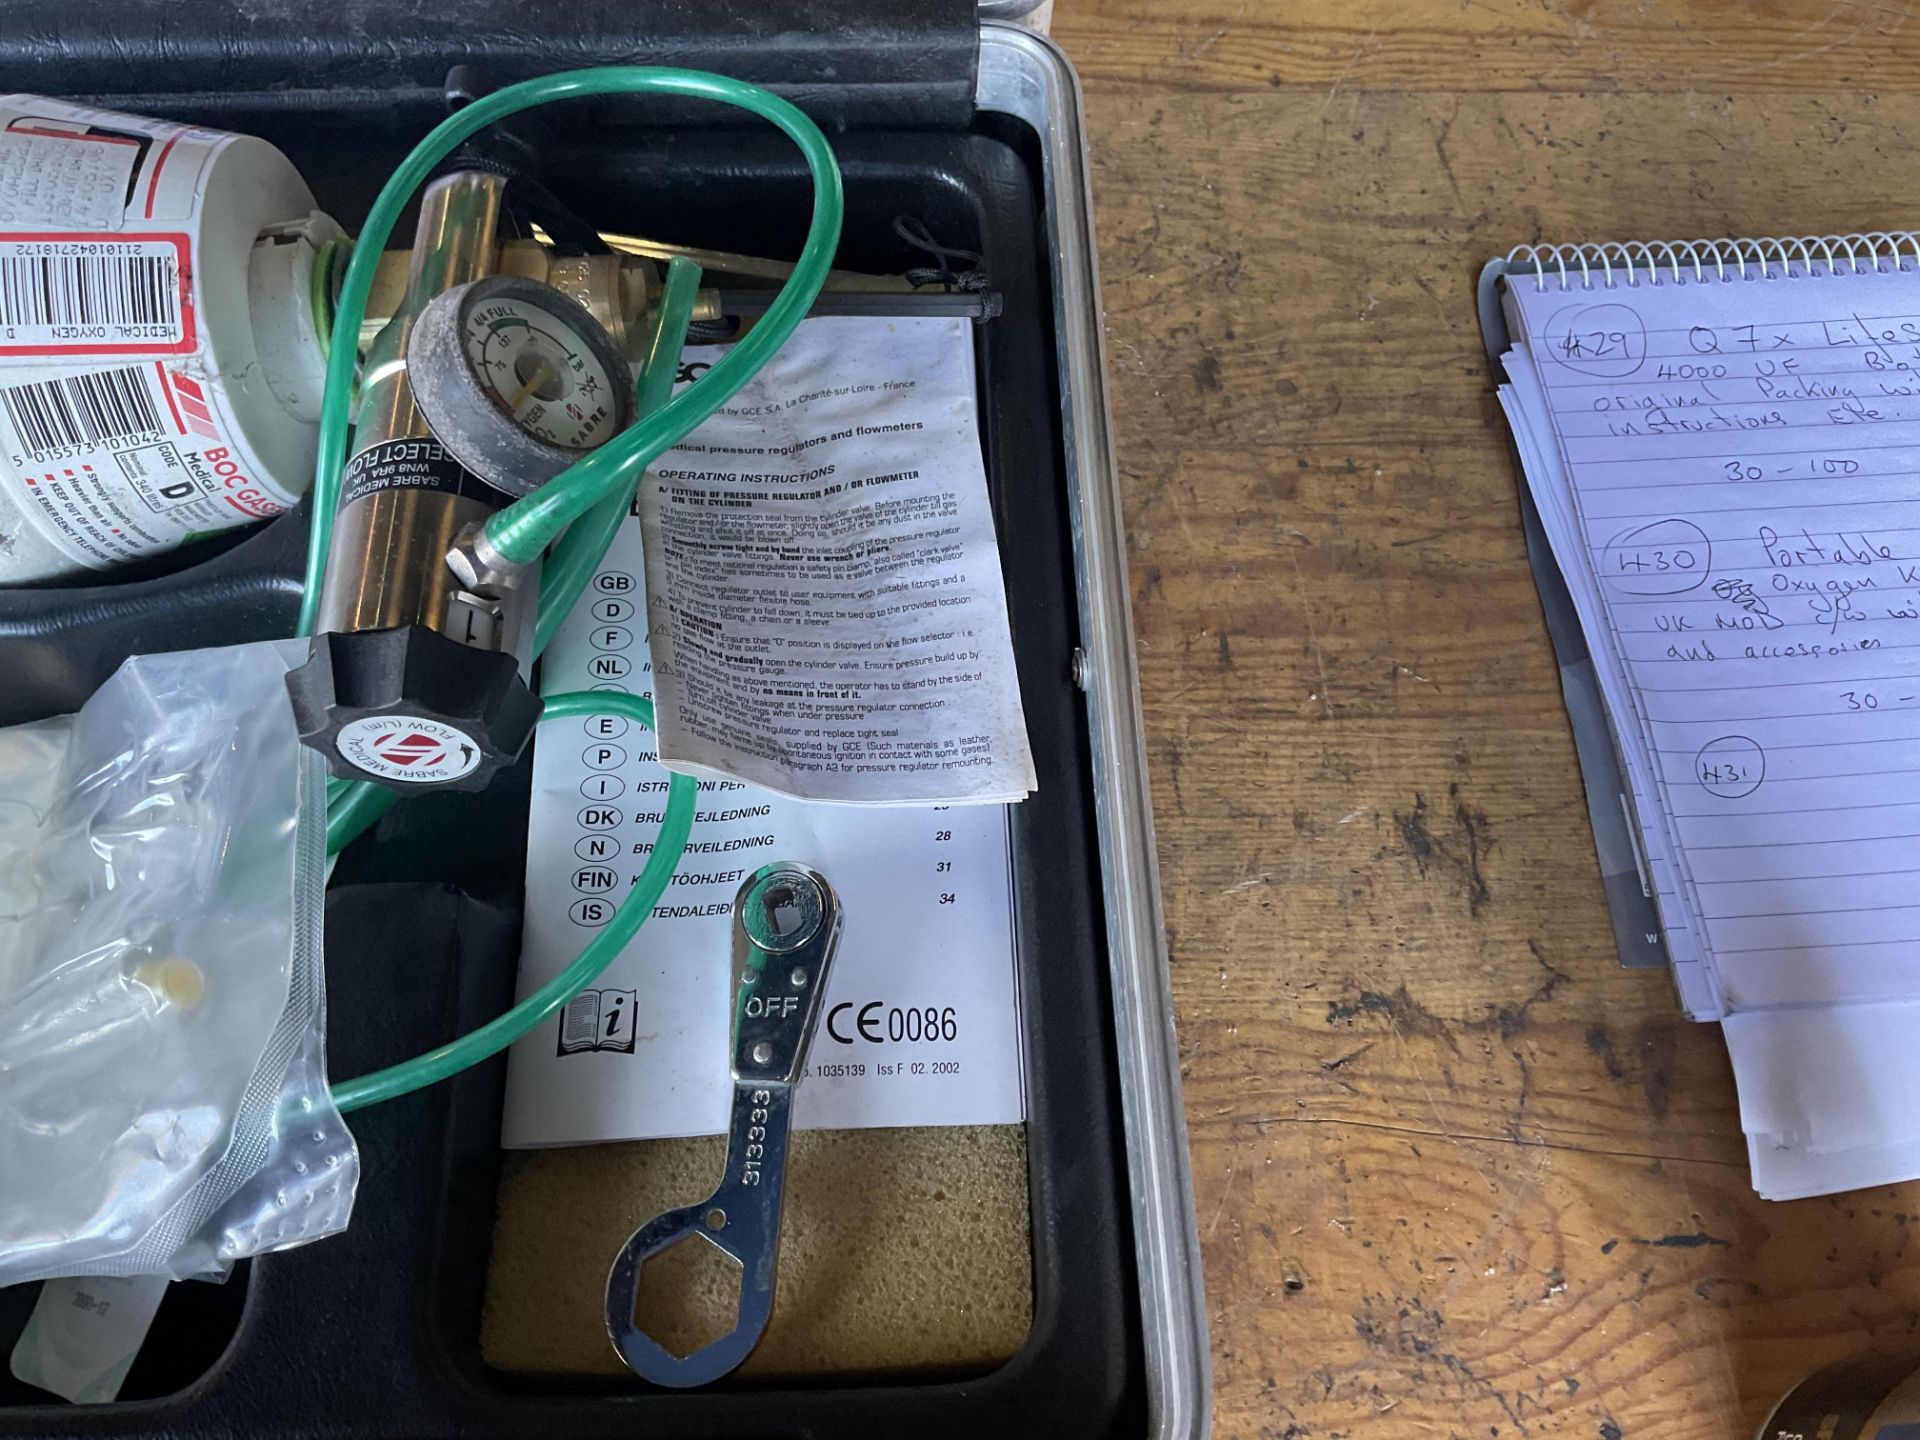 PORTABLE MEDICAL OXYGEN KIT FROM UK MOD C/W WITH INSTRUCTIONS AND ACCESSORIES - Image 3 of 4